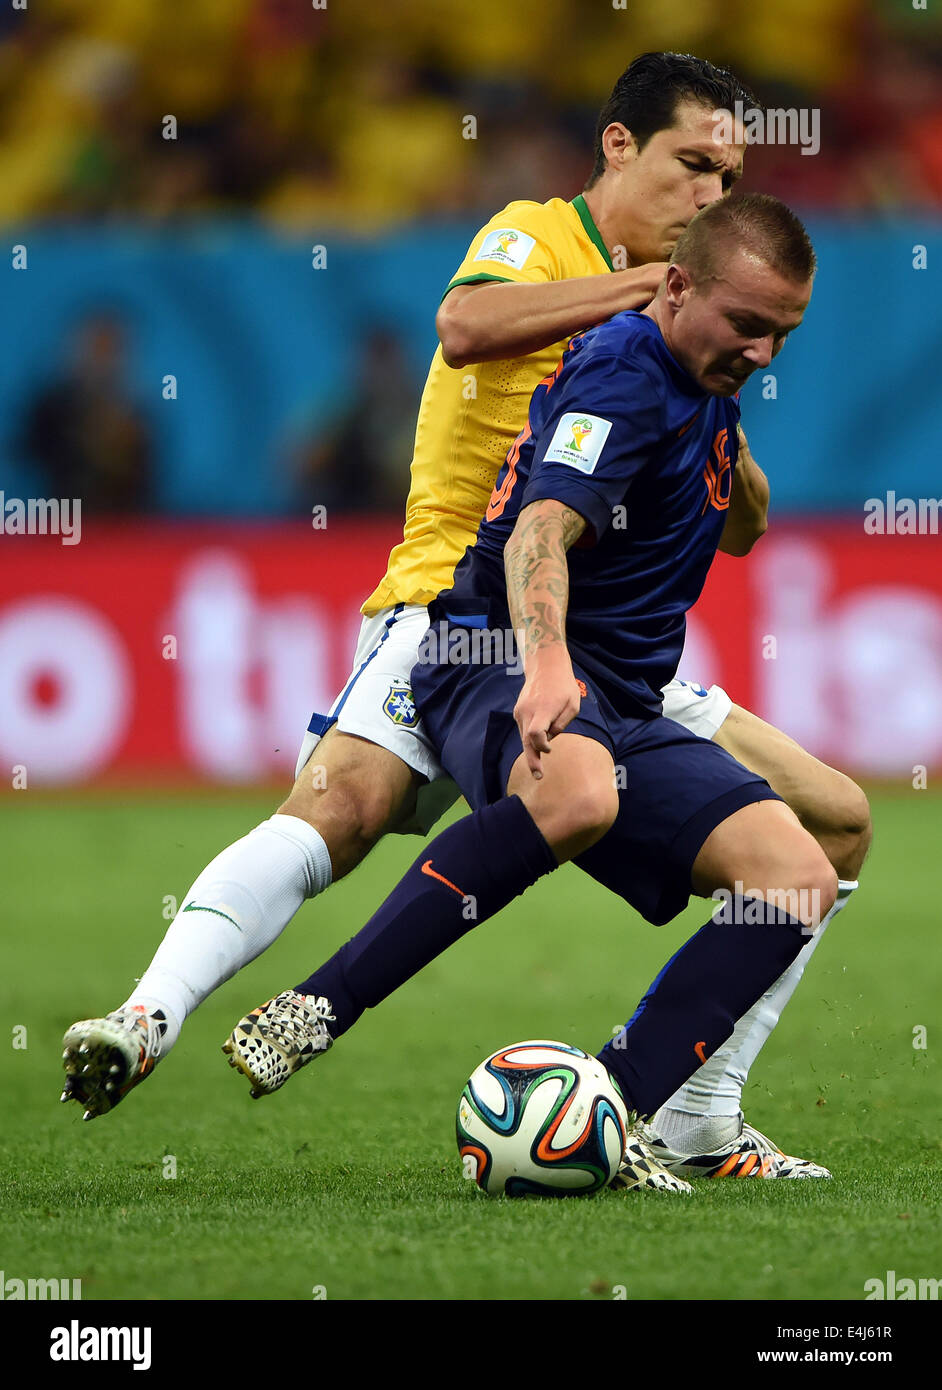 Brasilia, Brazil. 12th July, 2014. Netherlands' Jordy Clasie (R) controls the ball against Brazil's Paulinho during the third place play-off match between Brazil and Netherlands of 2014 FIFA World Cup at the Estadio Nacional Stadium in Brasilia, Brazil, on July 12, 2014. Credit:  Guo Yong/Xinhua/Alamy Live News Stock Photo